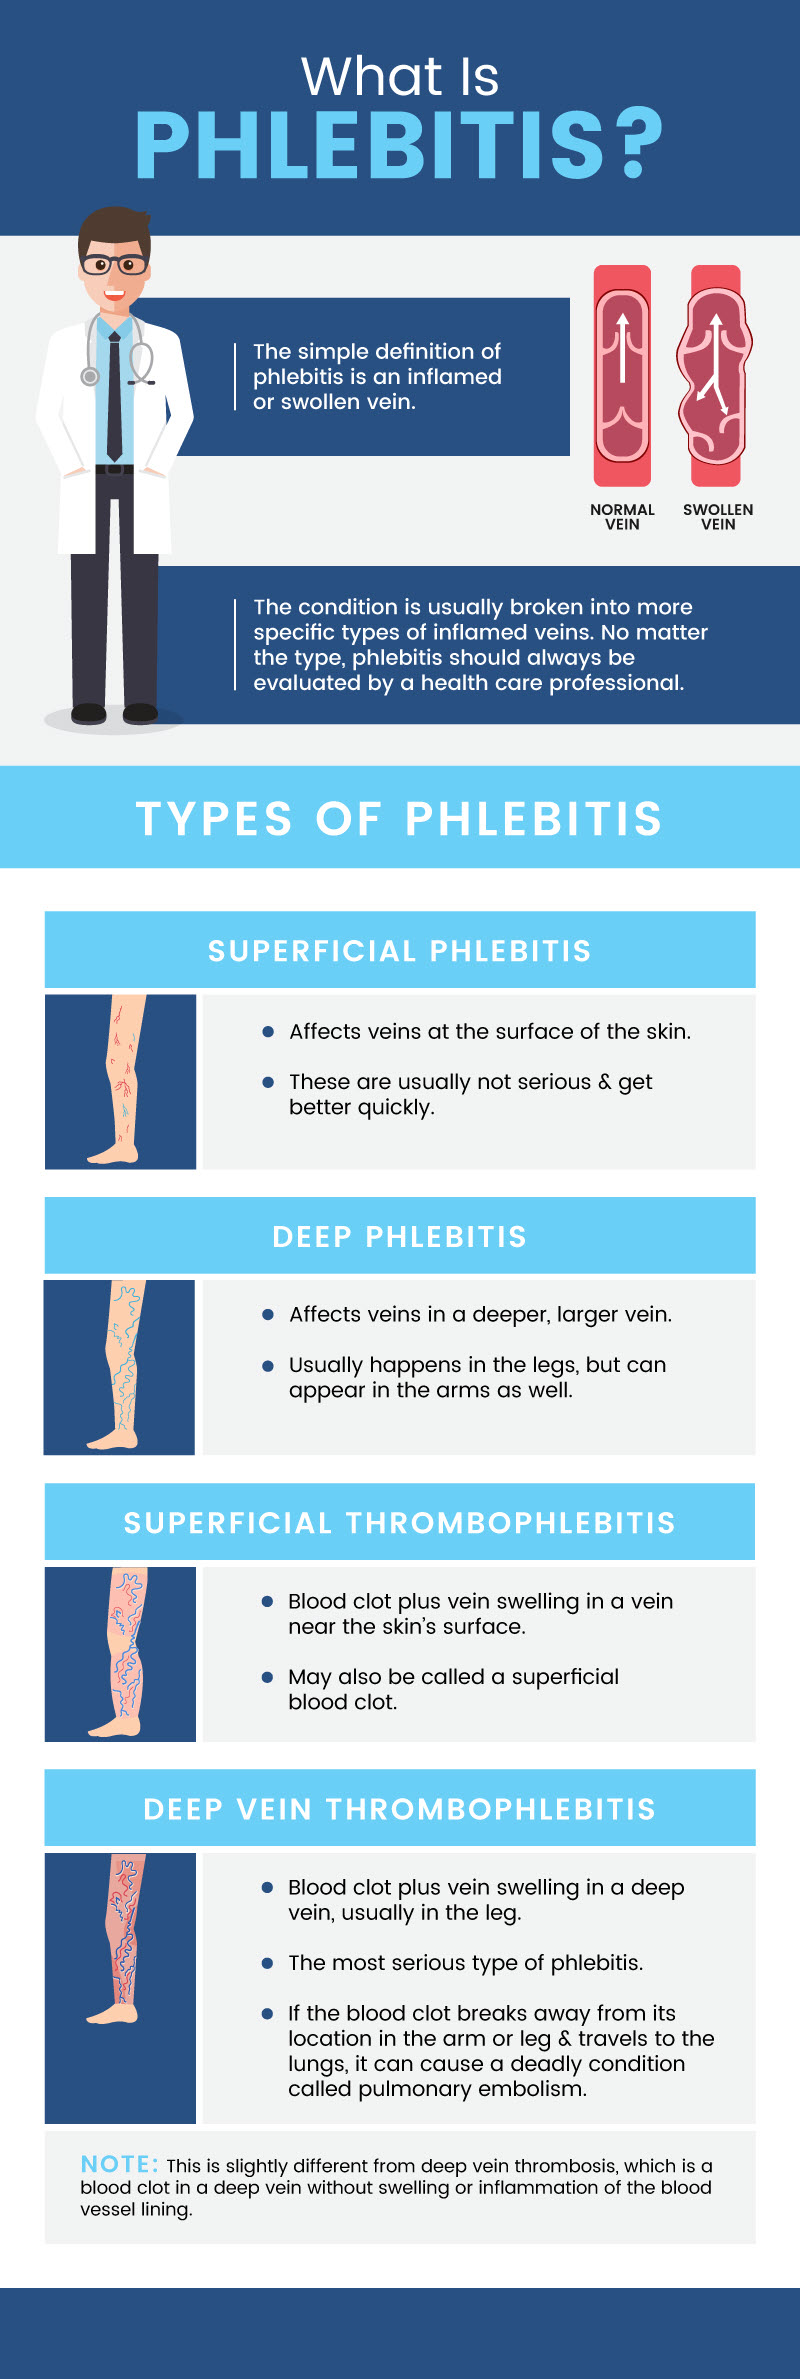 What is phlebitis? - MKexpress.net